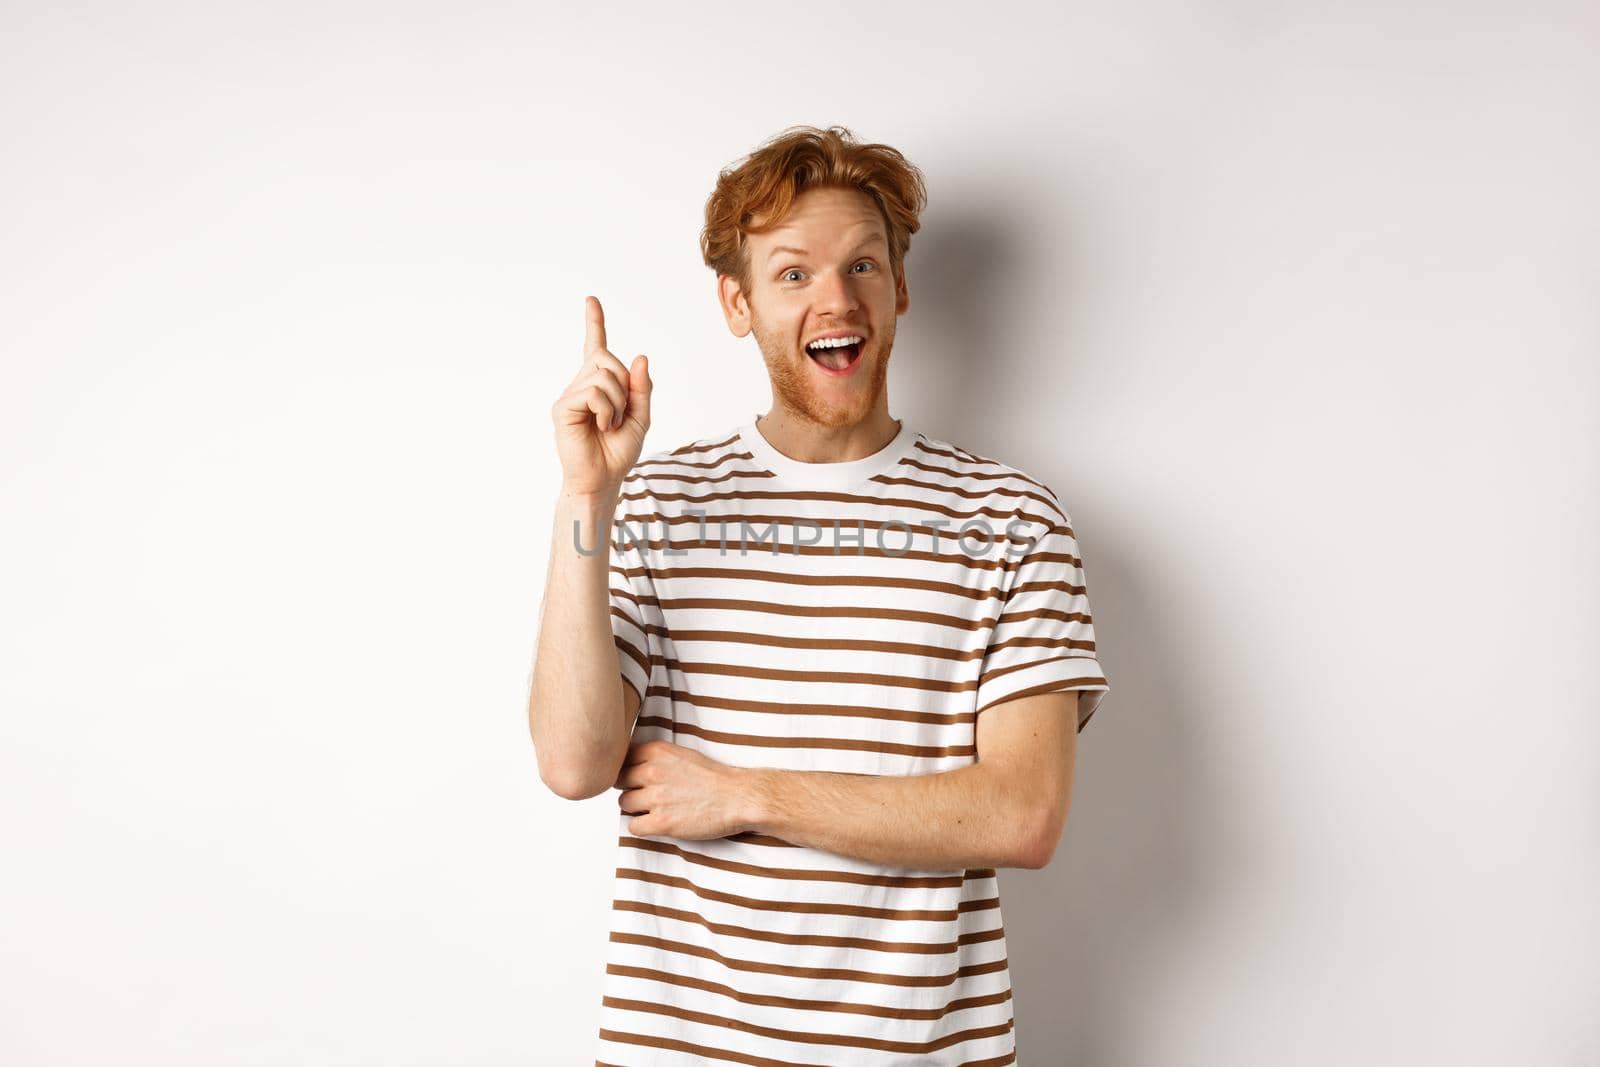 Young man with red hair having an idea, raising finger to say suggestion, standing happy over white background.